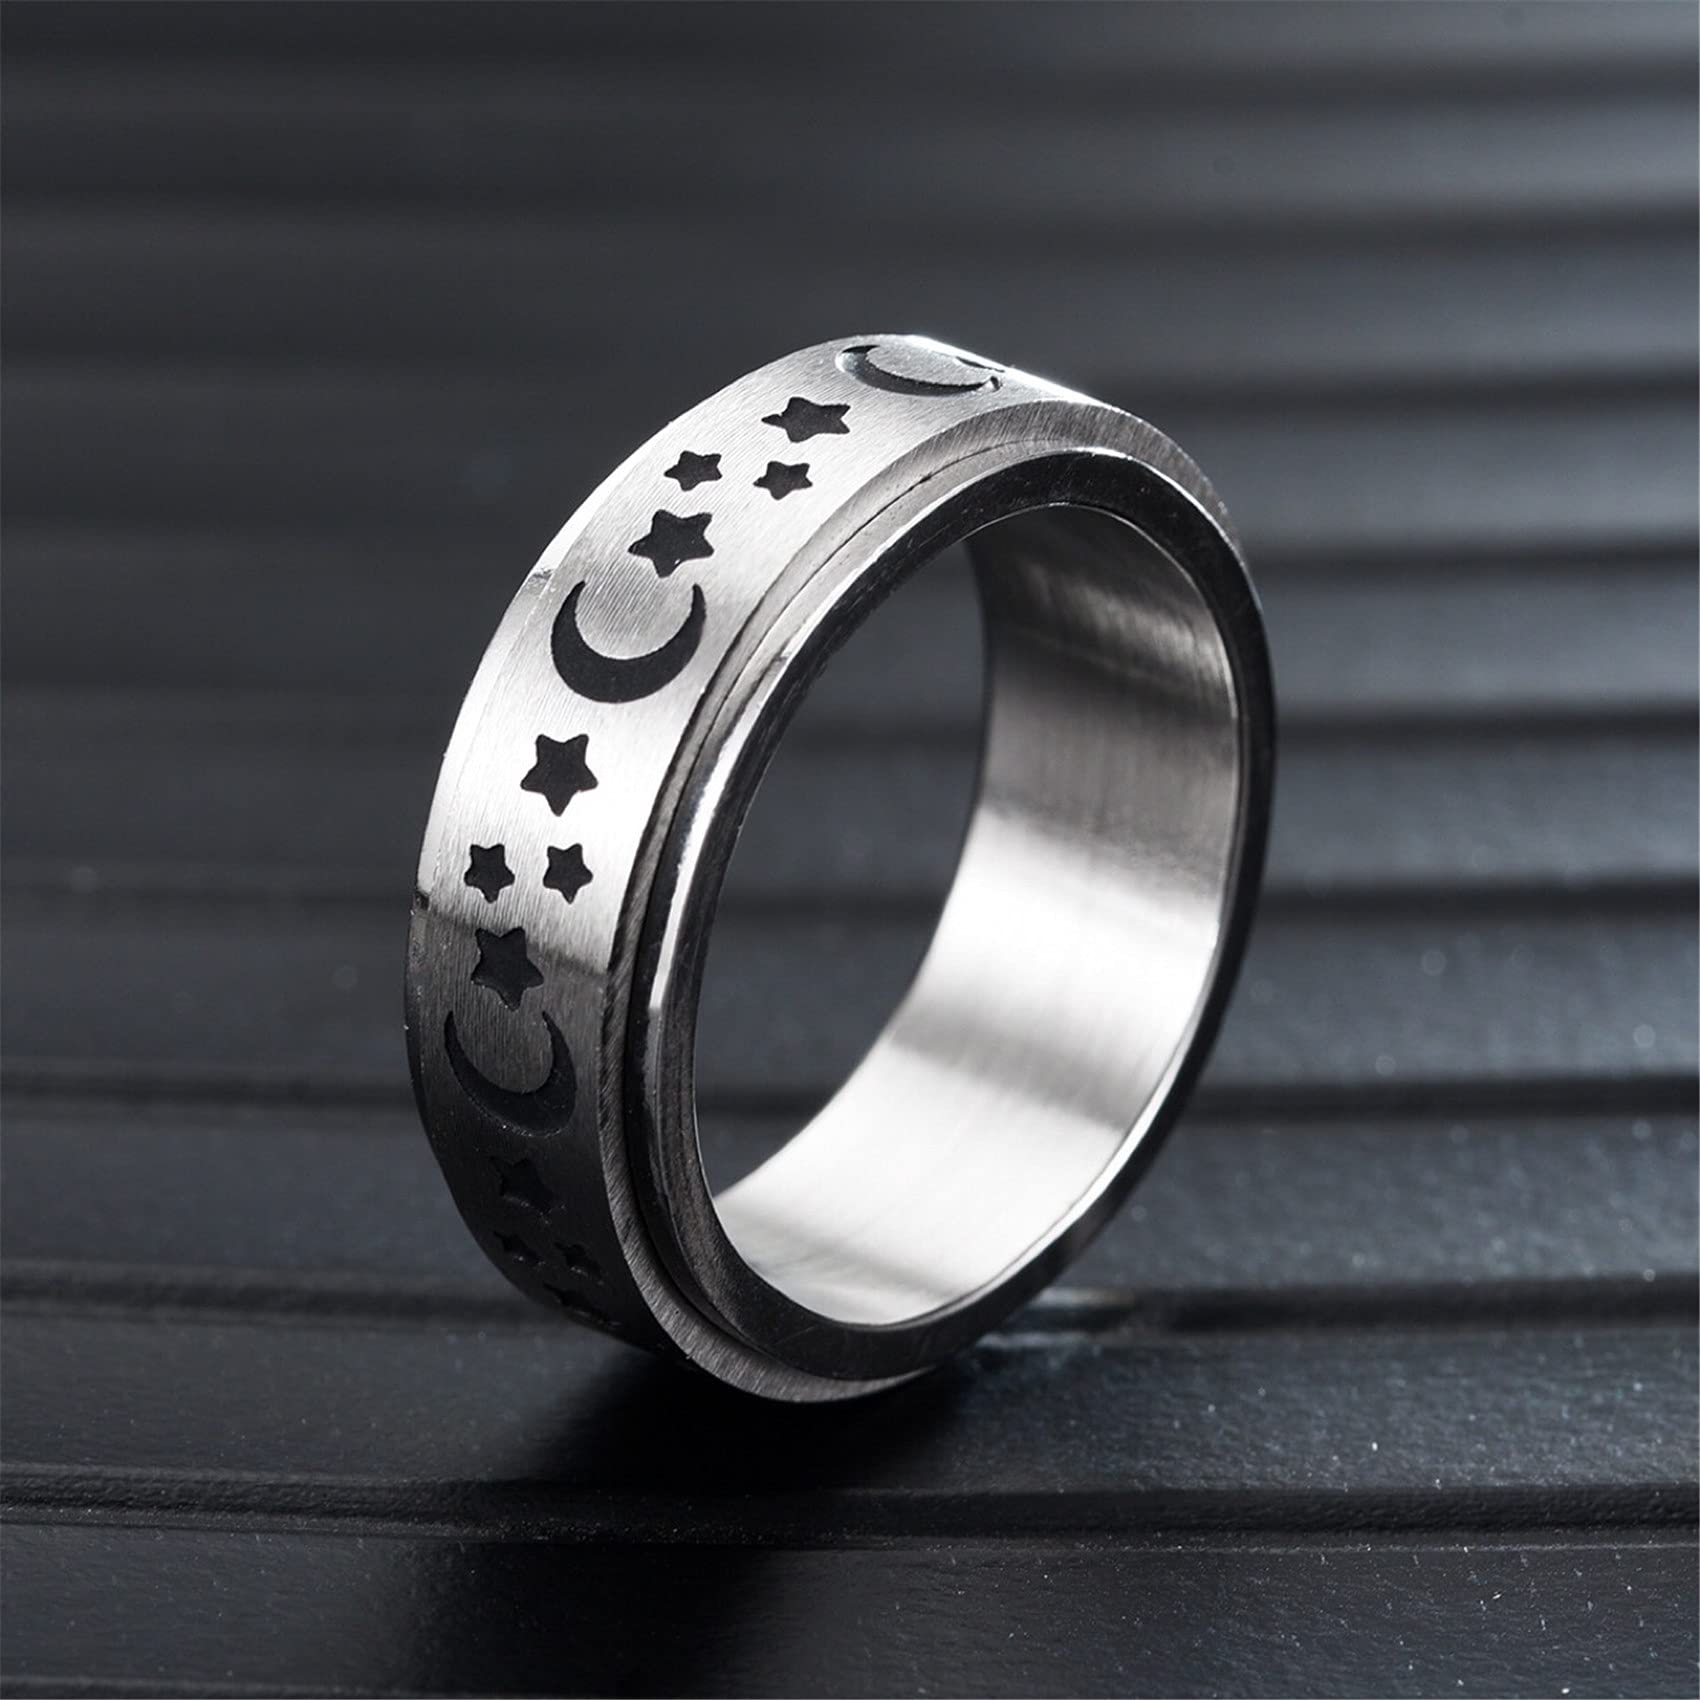 Kshcf Spinner Ring Titanium Steel Ring Anxiety Ring Fashion Decompression Ring Moon and Star Fidget Ring for Women Men